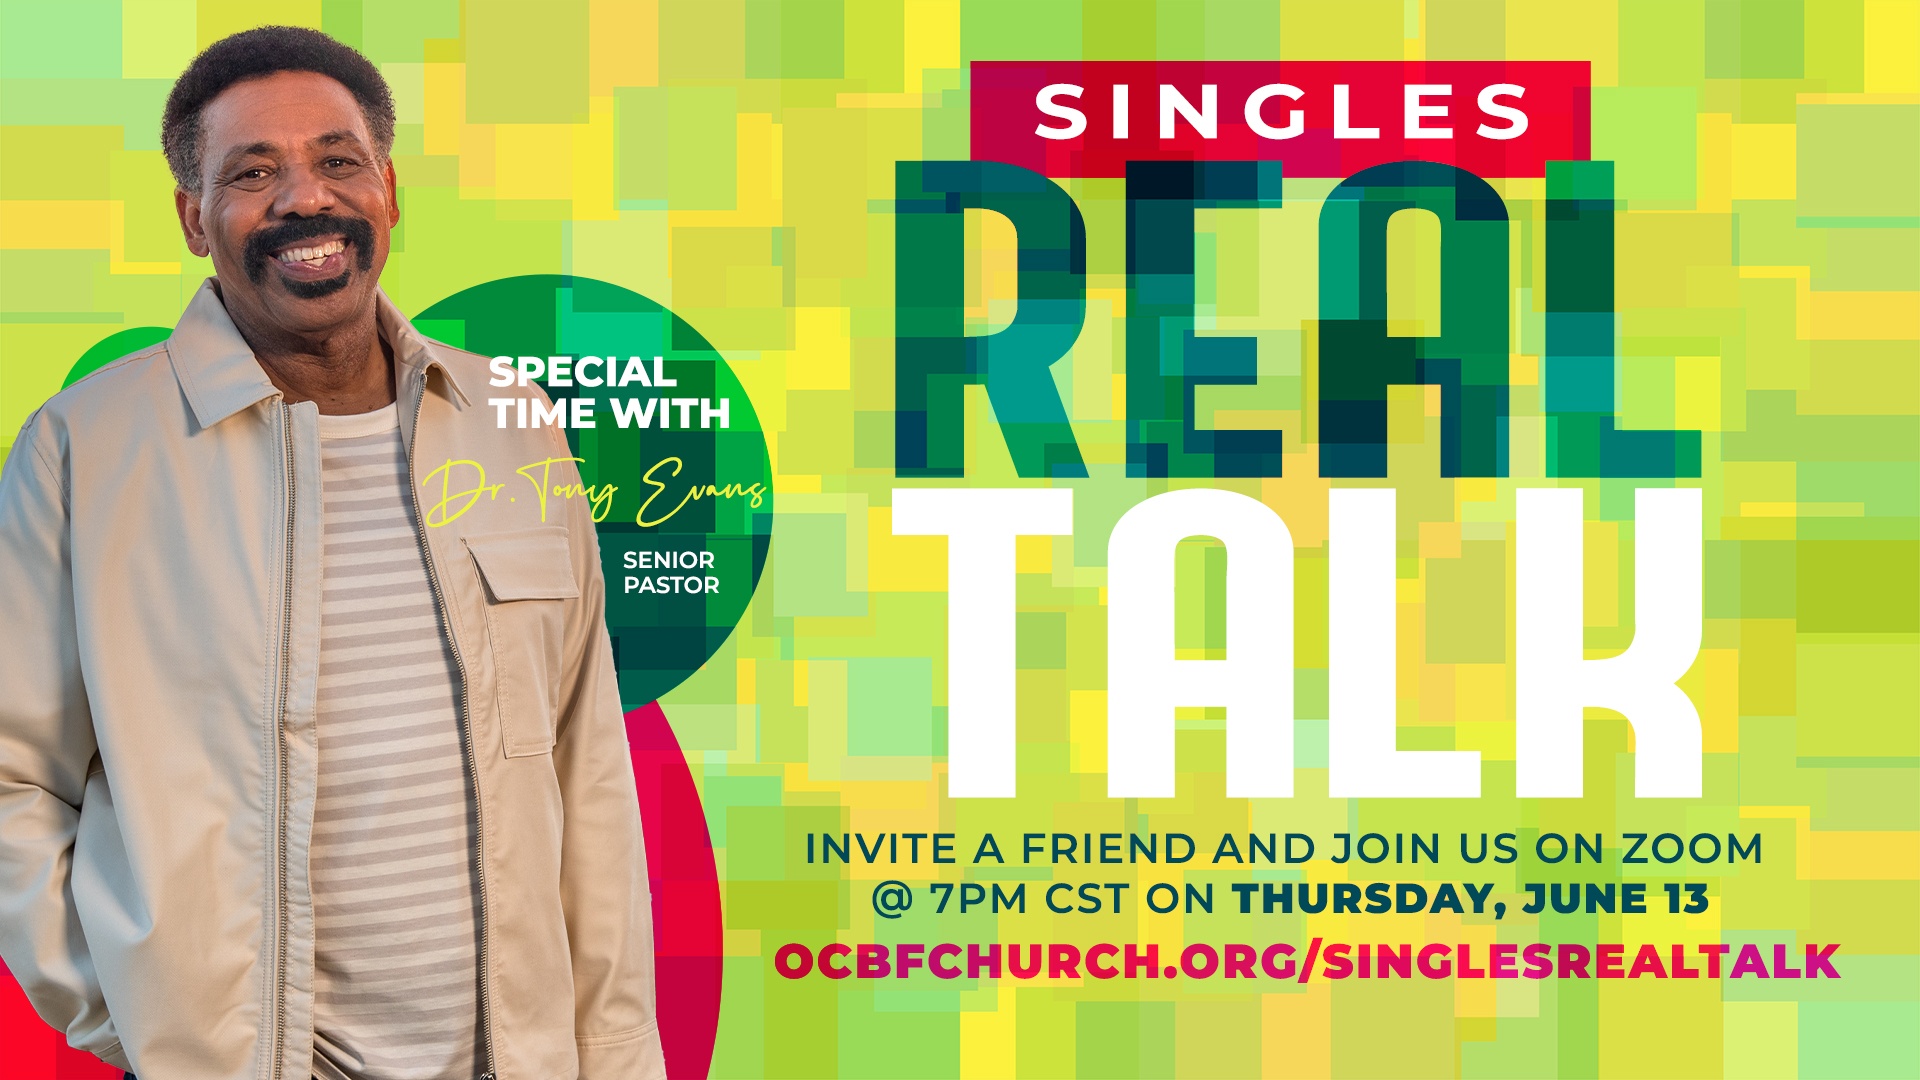 Tony Evans for SingleLife Real Talk about current issues faced by singles.